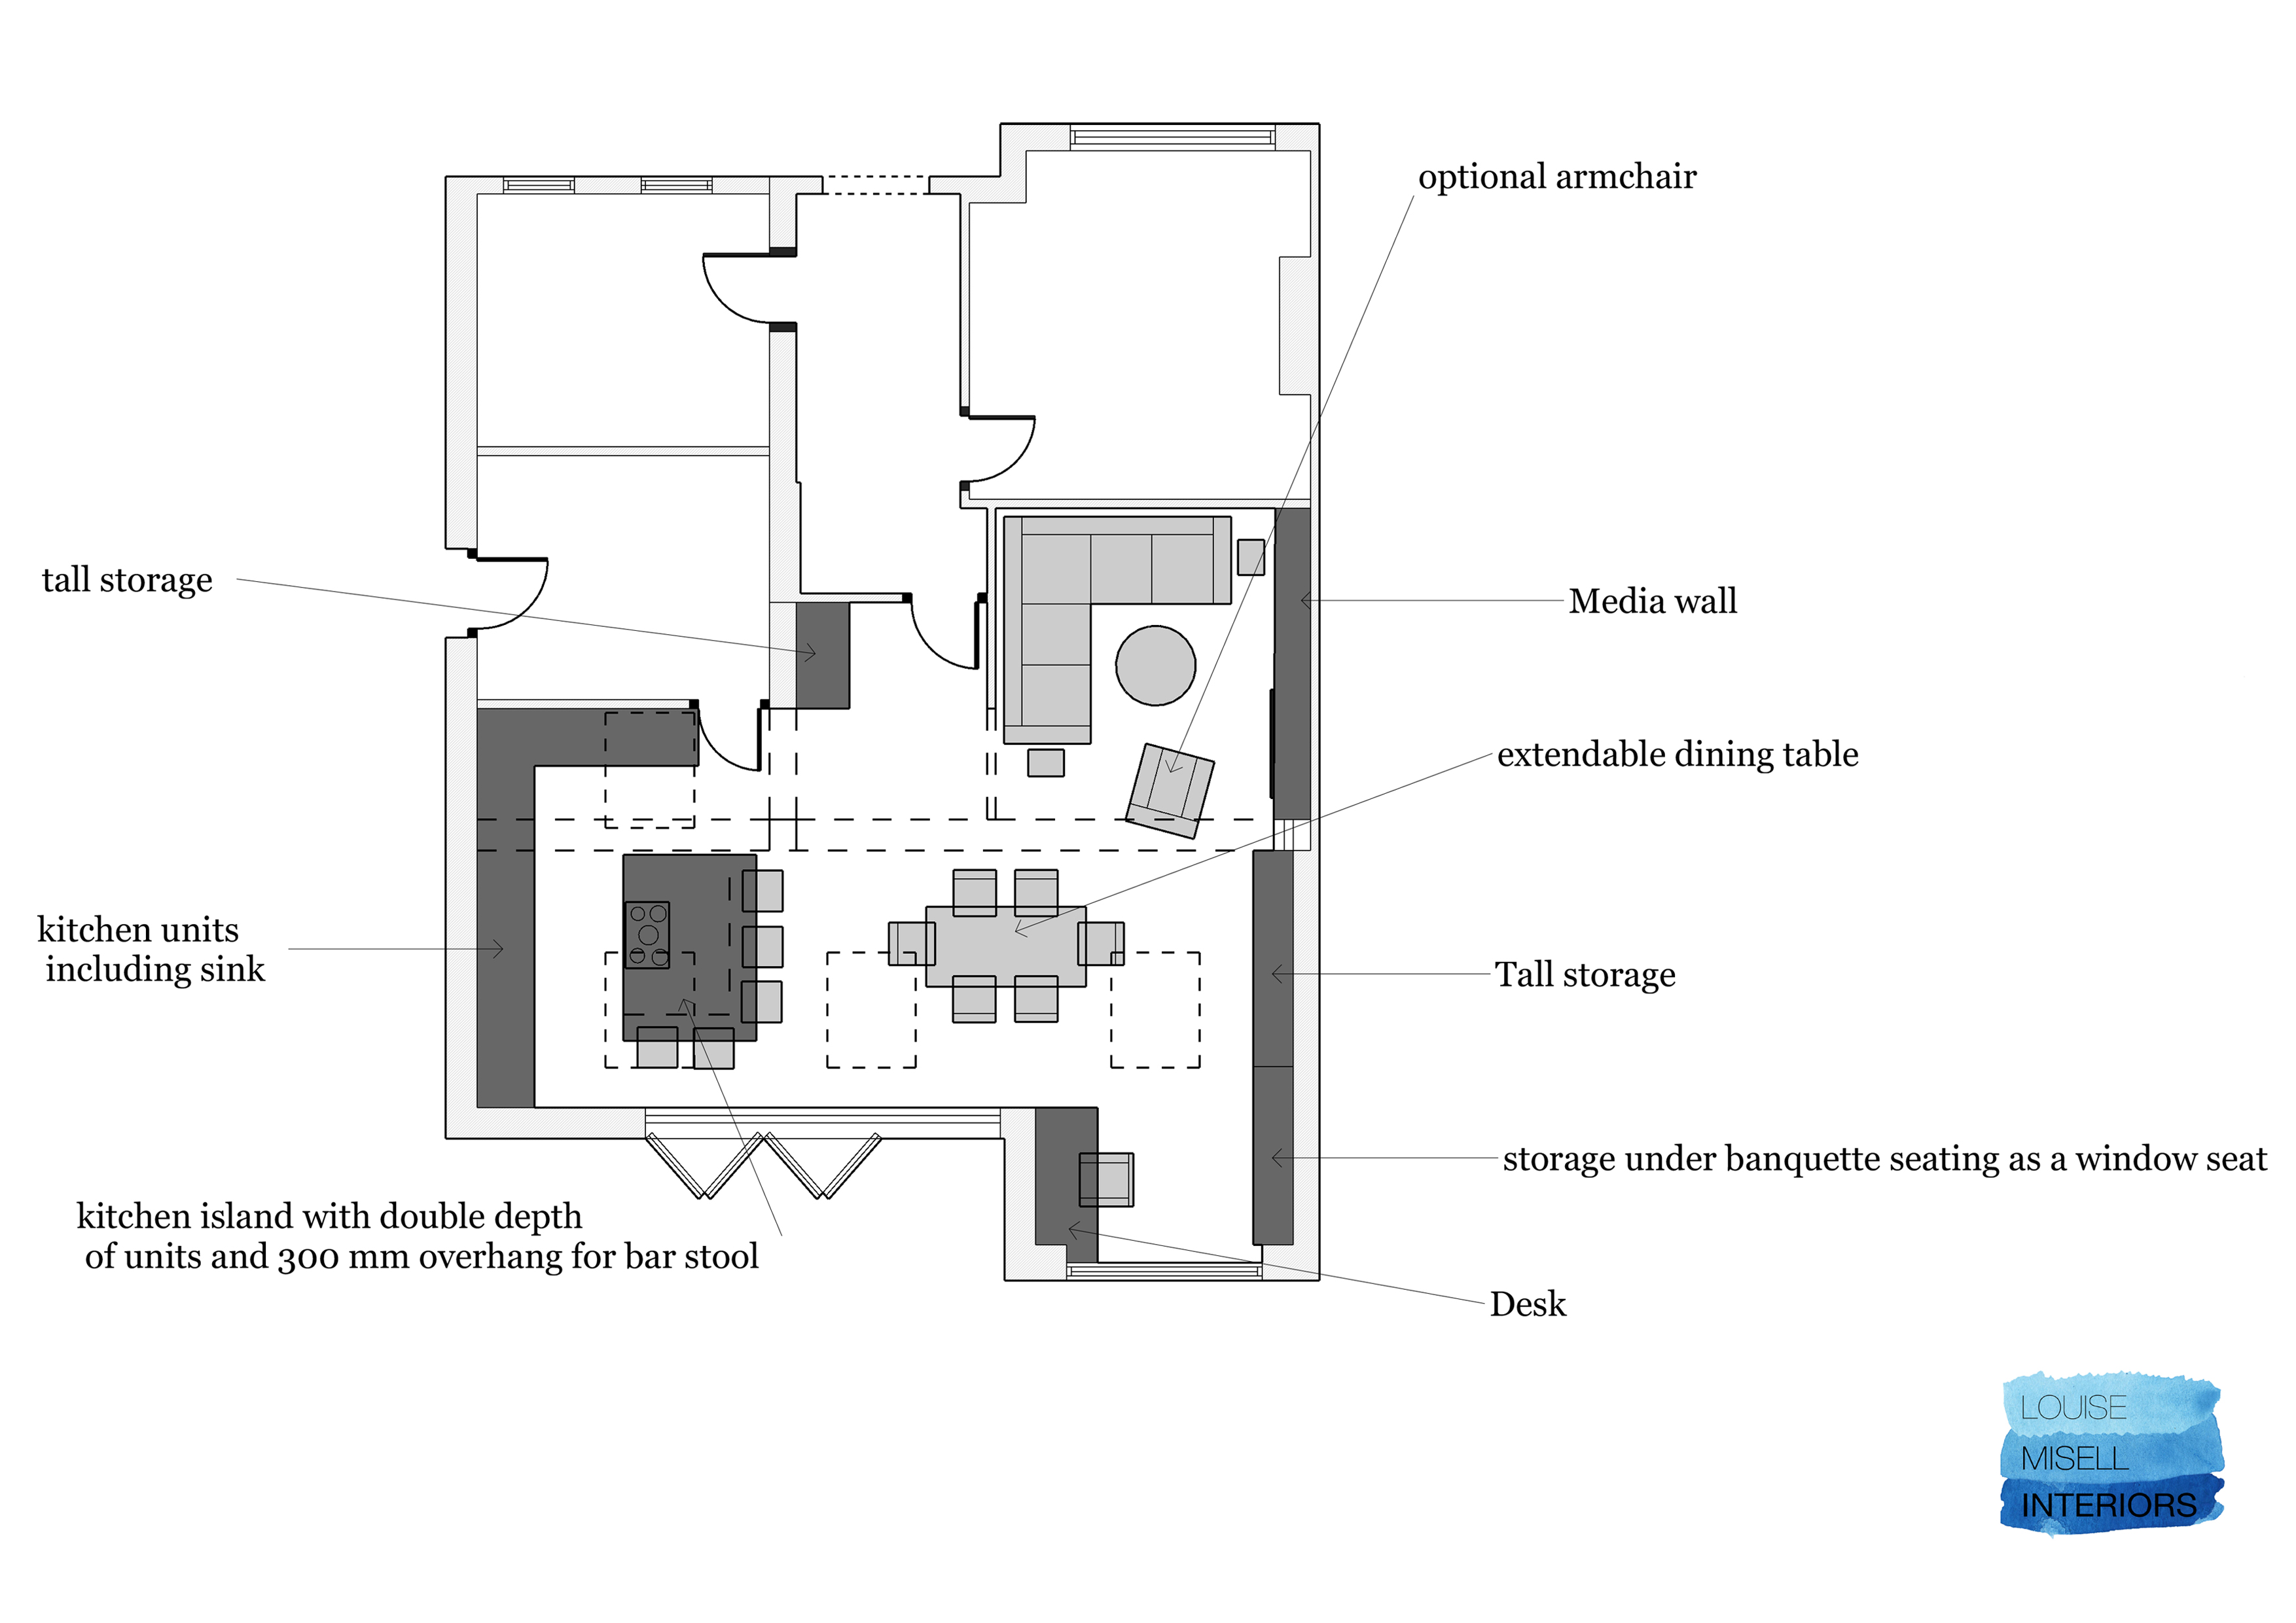 A floorpan showing furniture placement for a living room, kitchen & dinning room. 